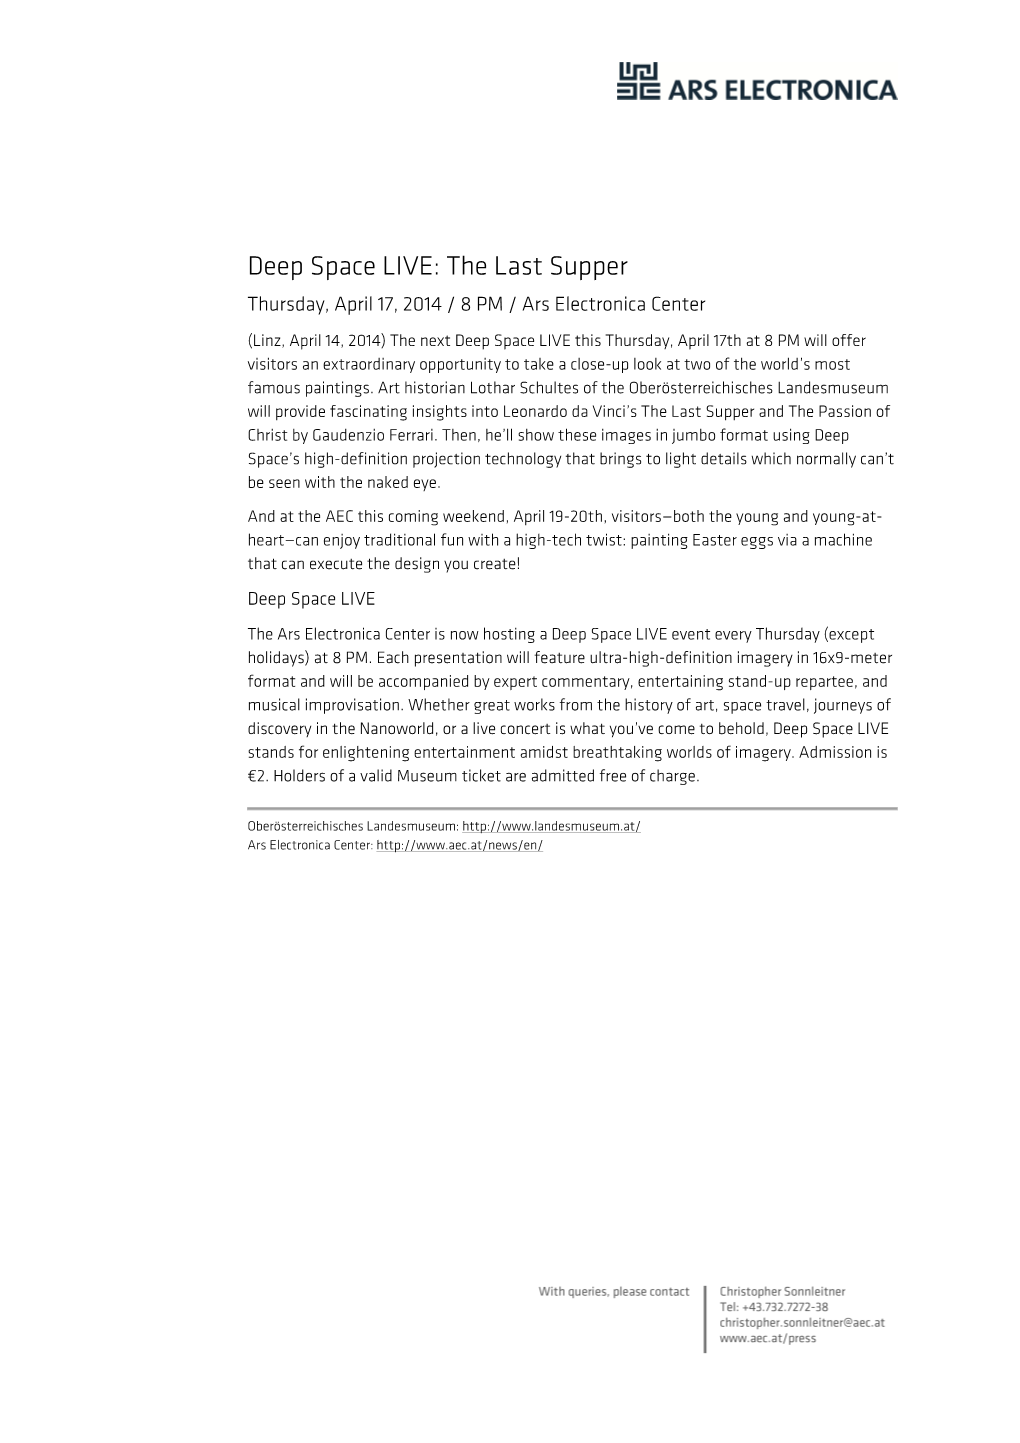 Deep Space LIVE: the Last Supper Thursday, April 17, 2014 / 8 PM / Ars Electronica Center